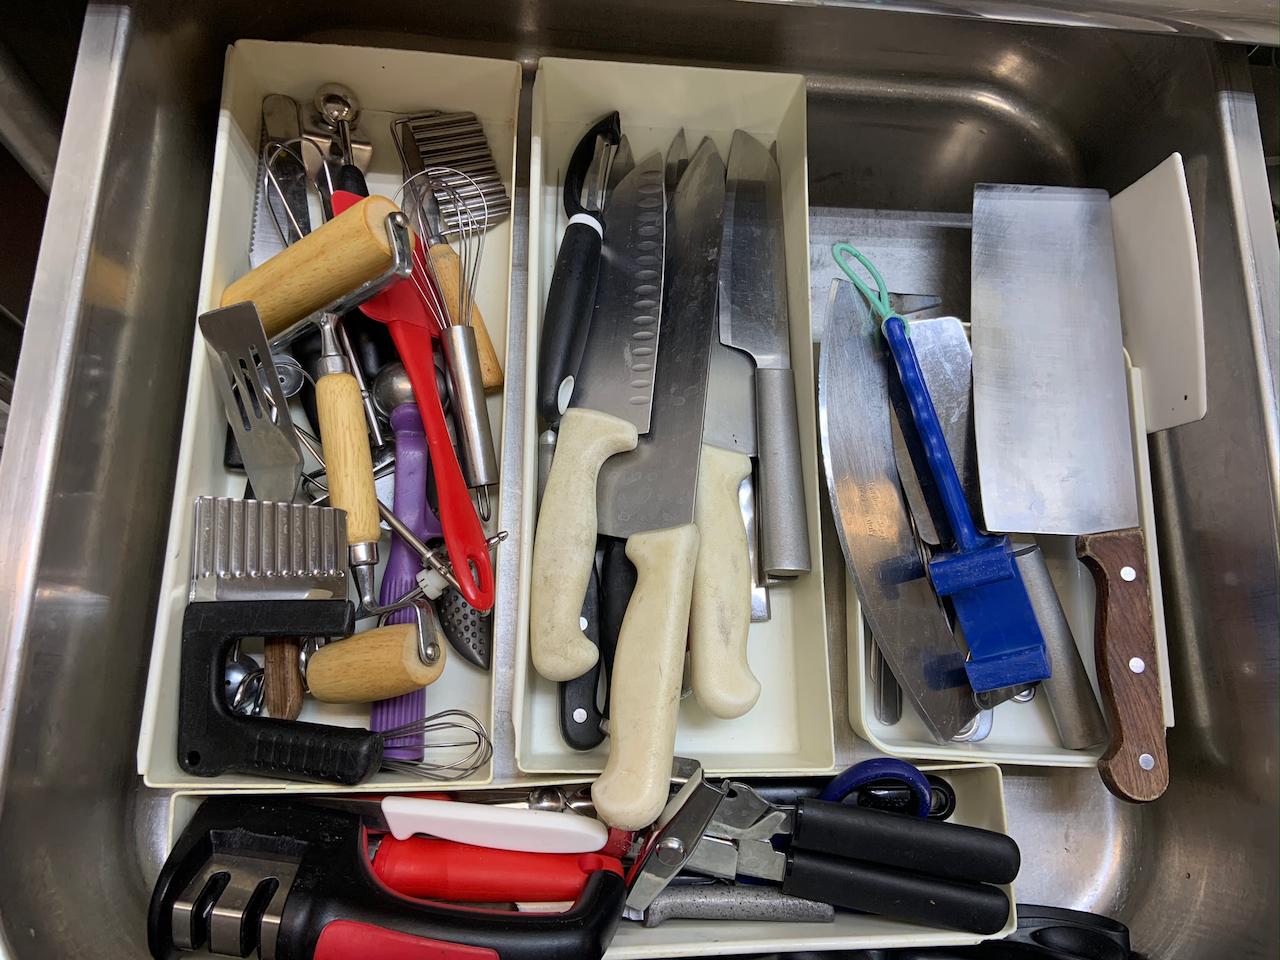 Assorted knife and Utensils